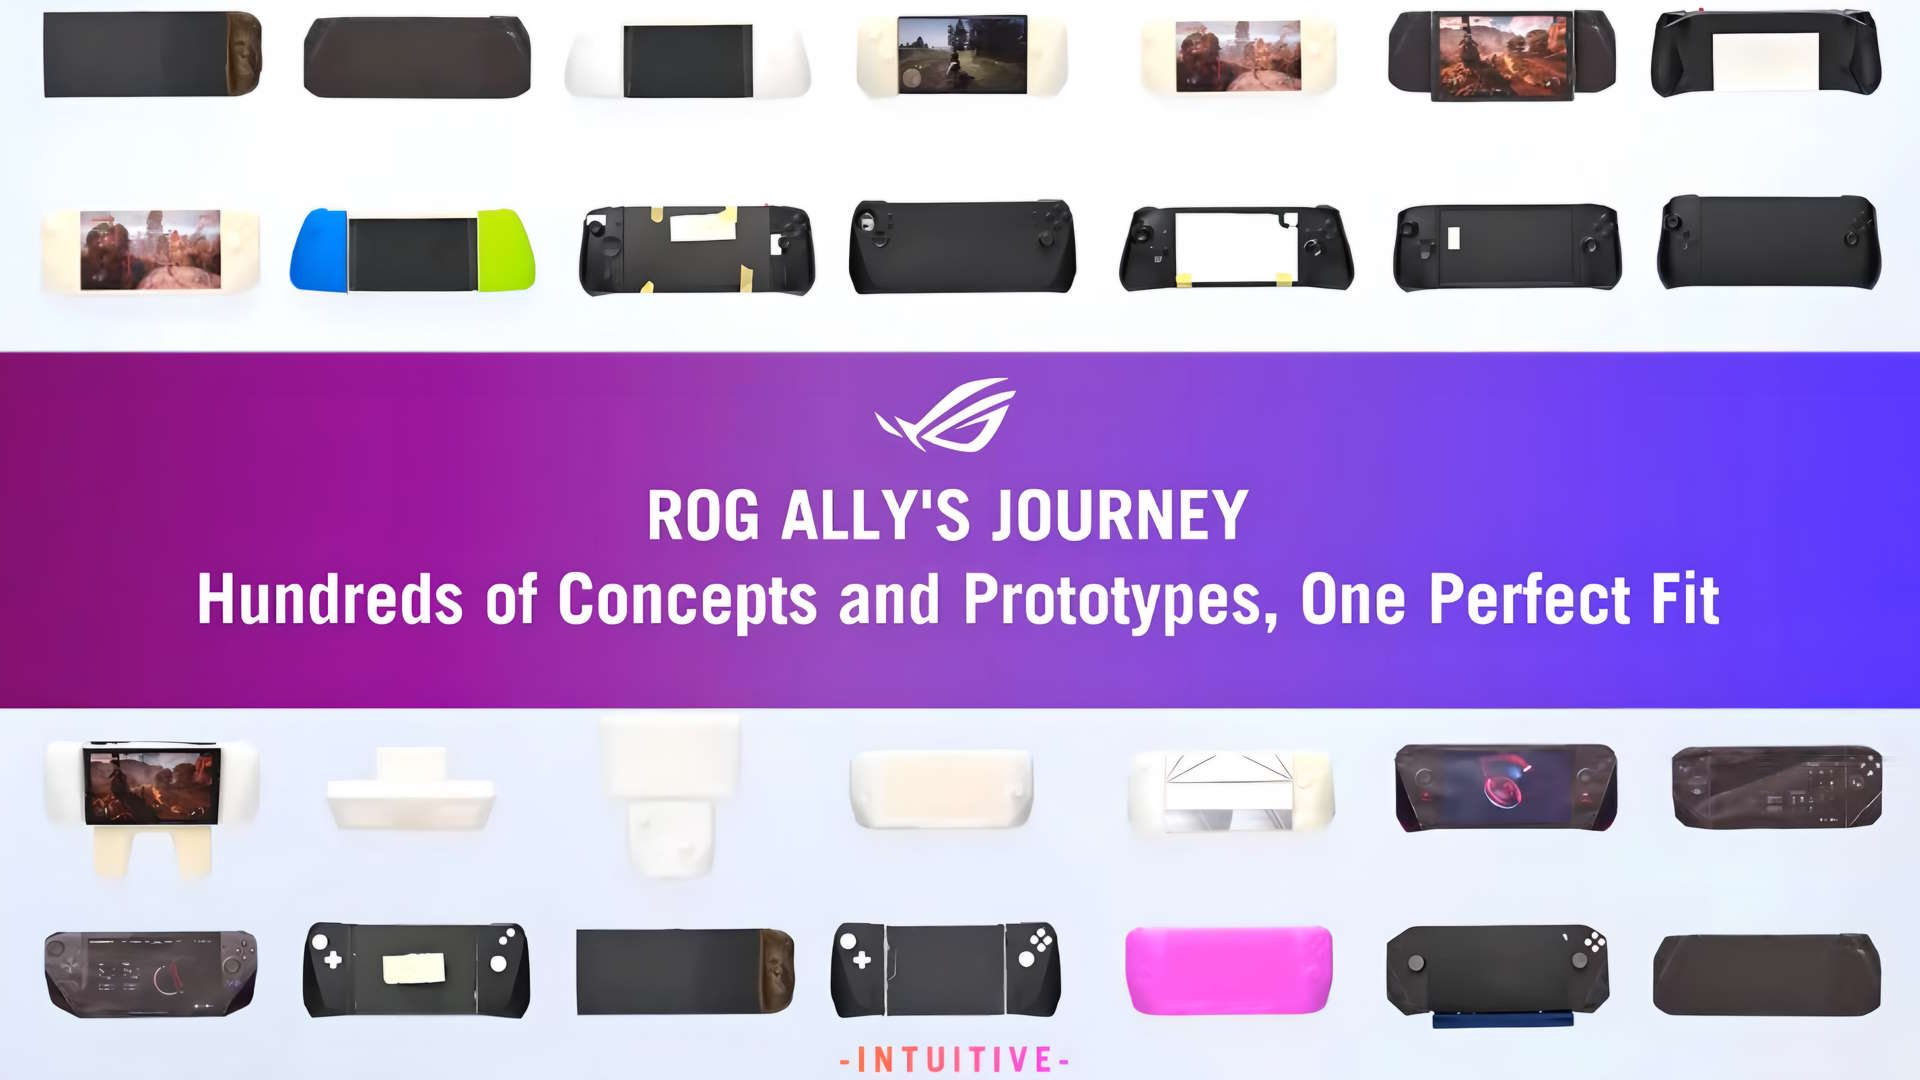 More ASUS ROG Ally Details Revealed in Prototype Video